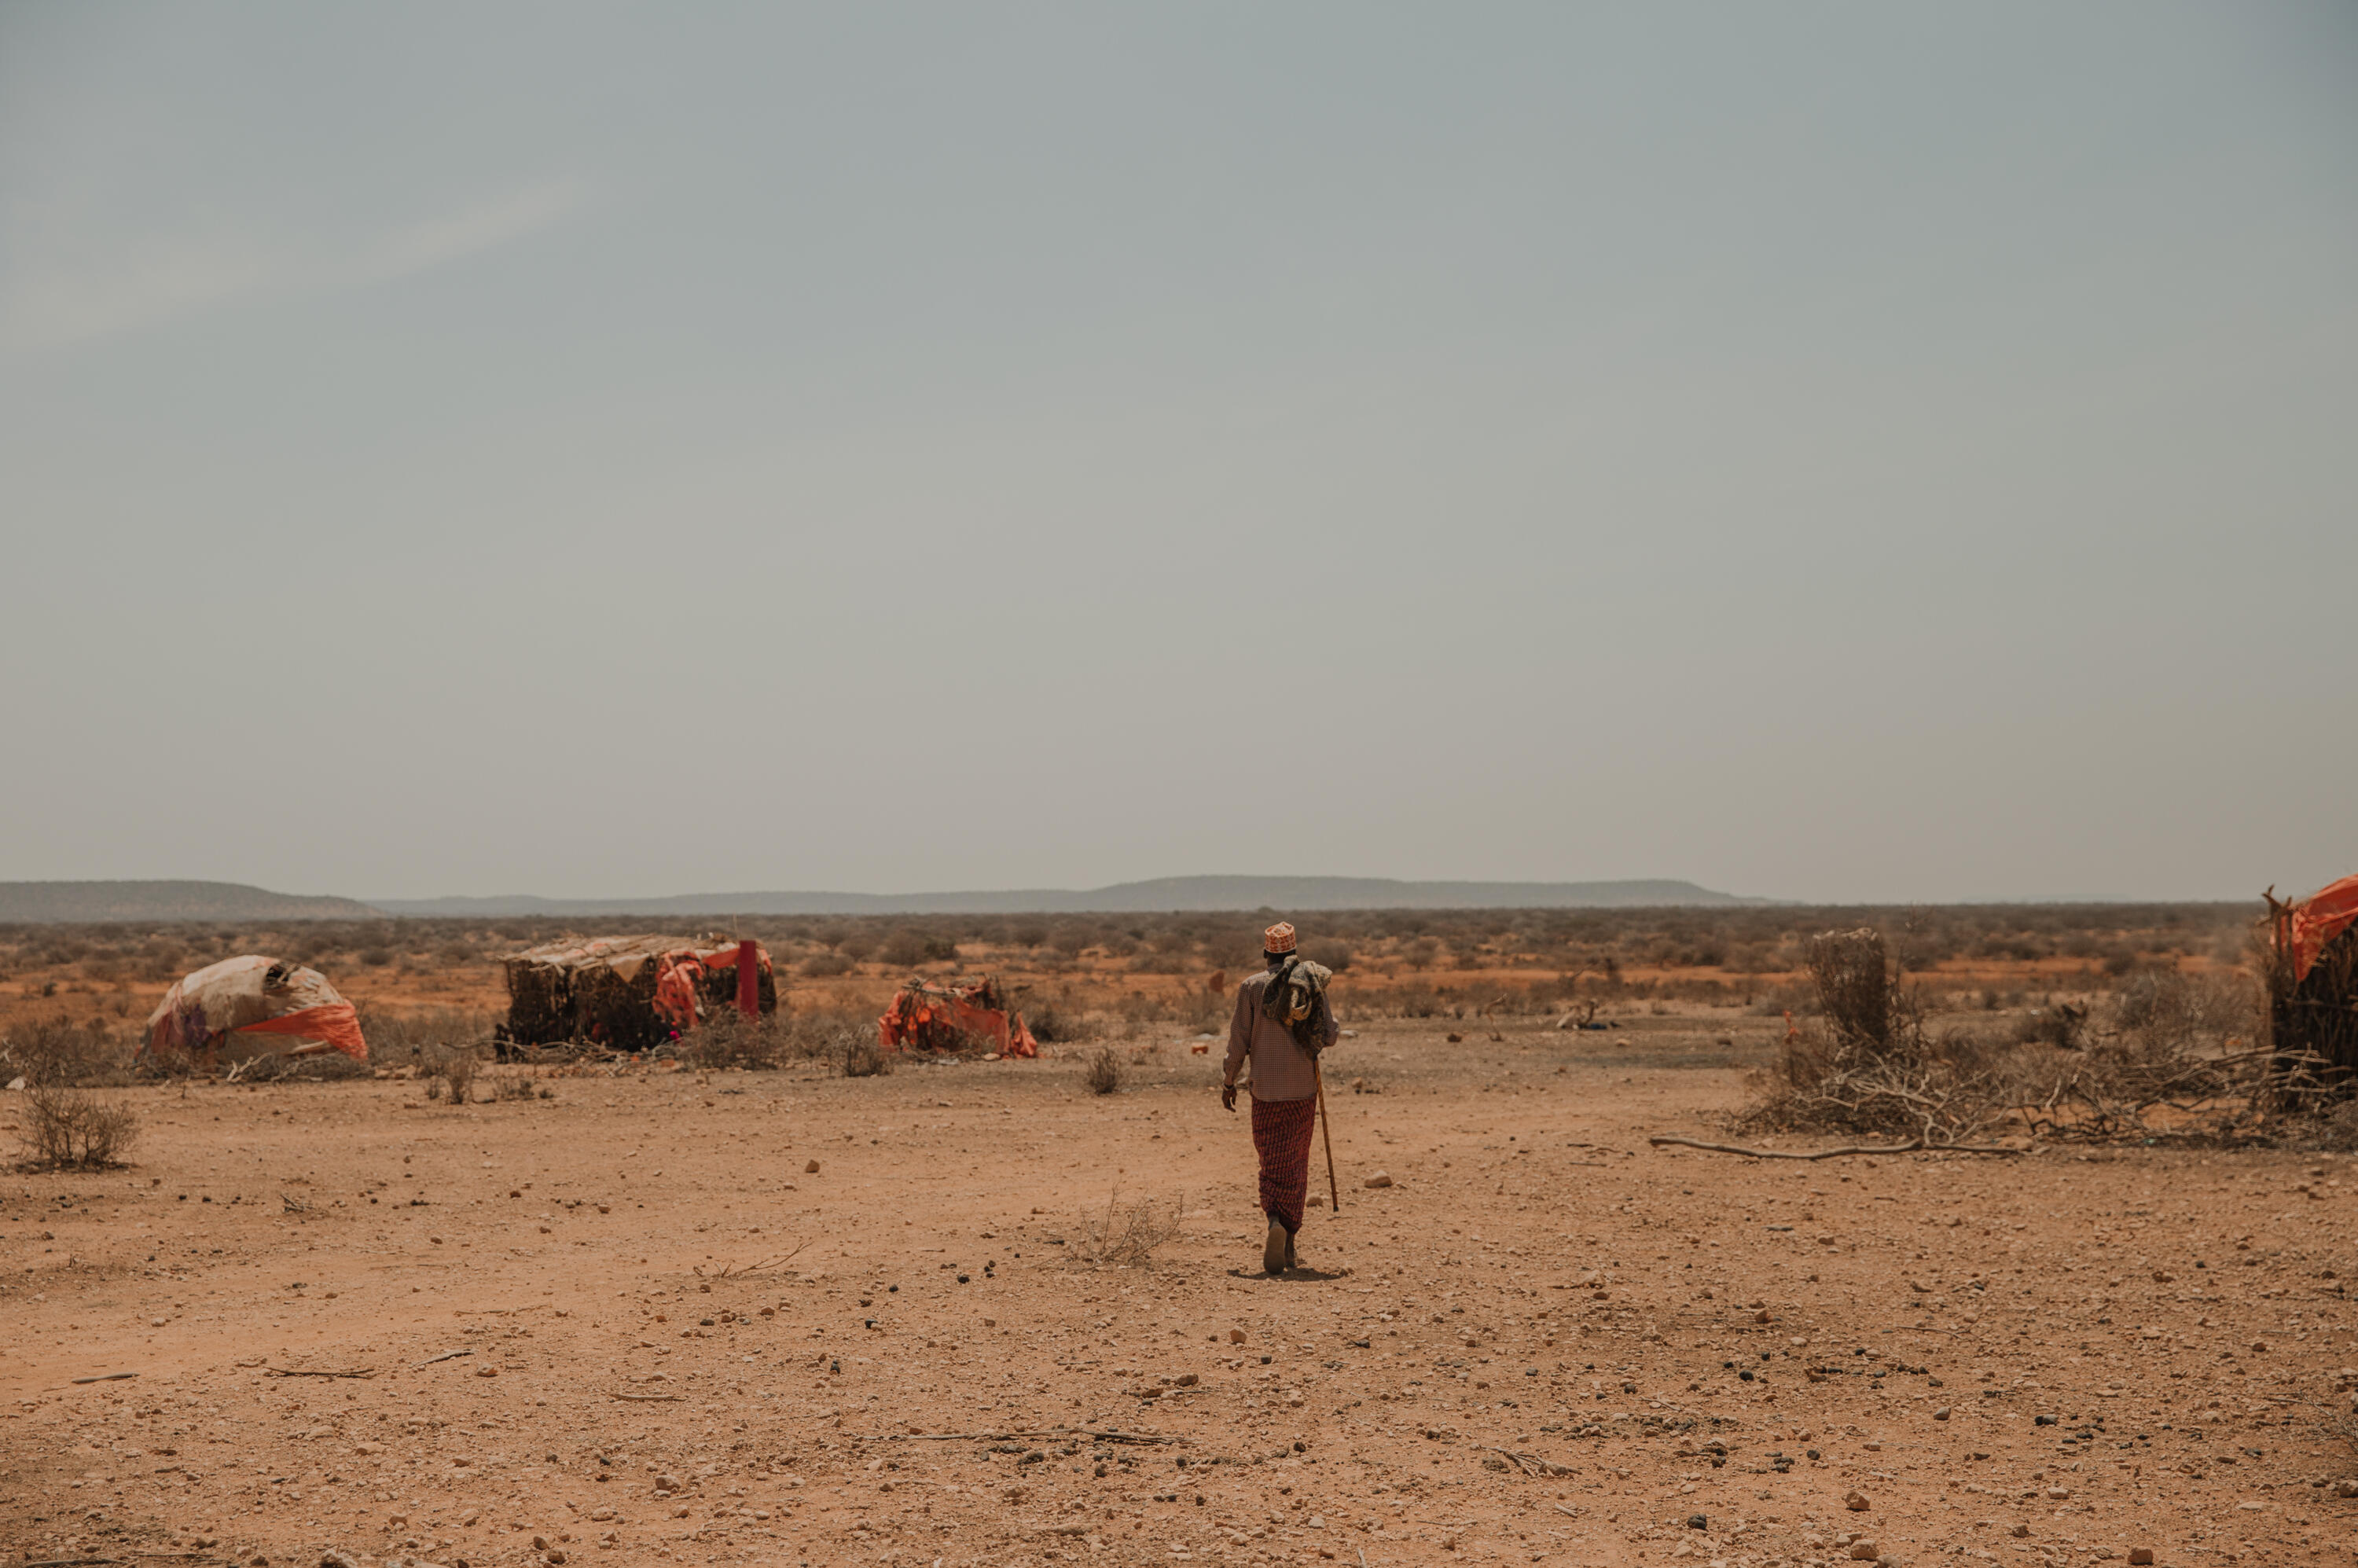 A man carrying a staff walks through a parched landscape in Ethiopia amid makeshift tents with mountains in the distance under a hazy sky.